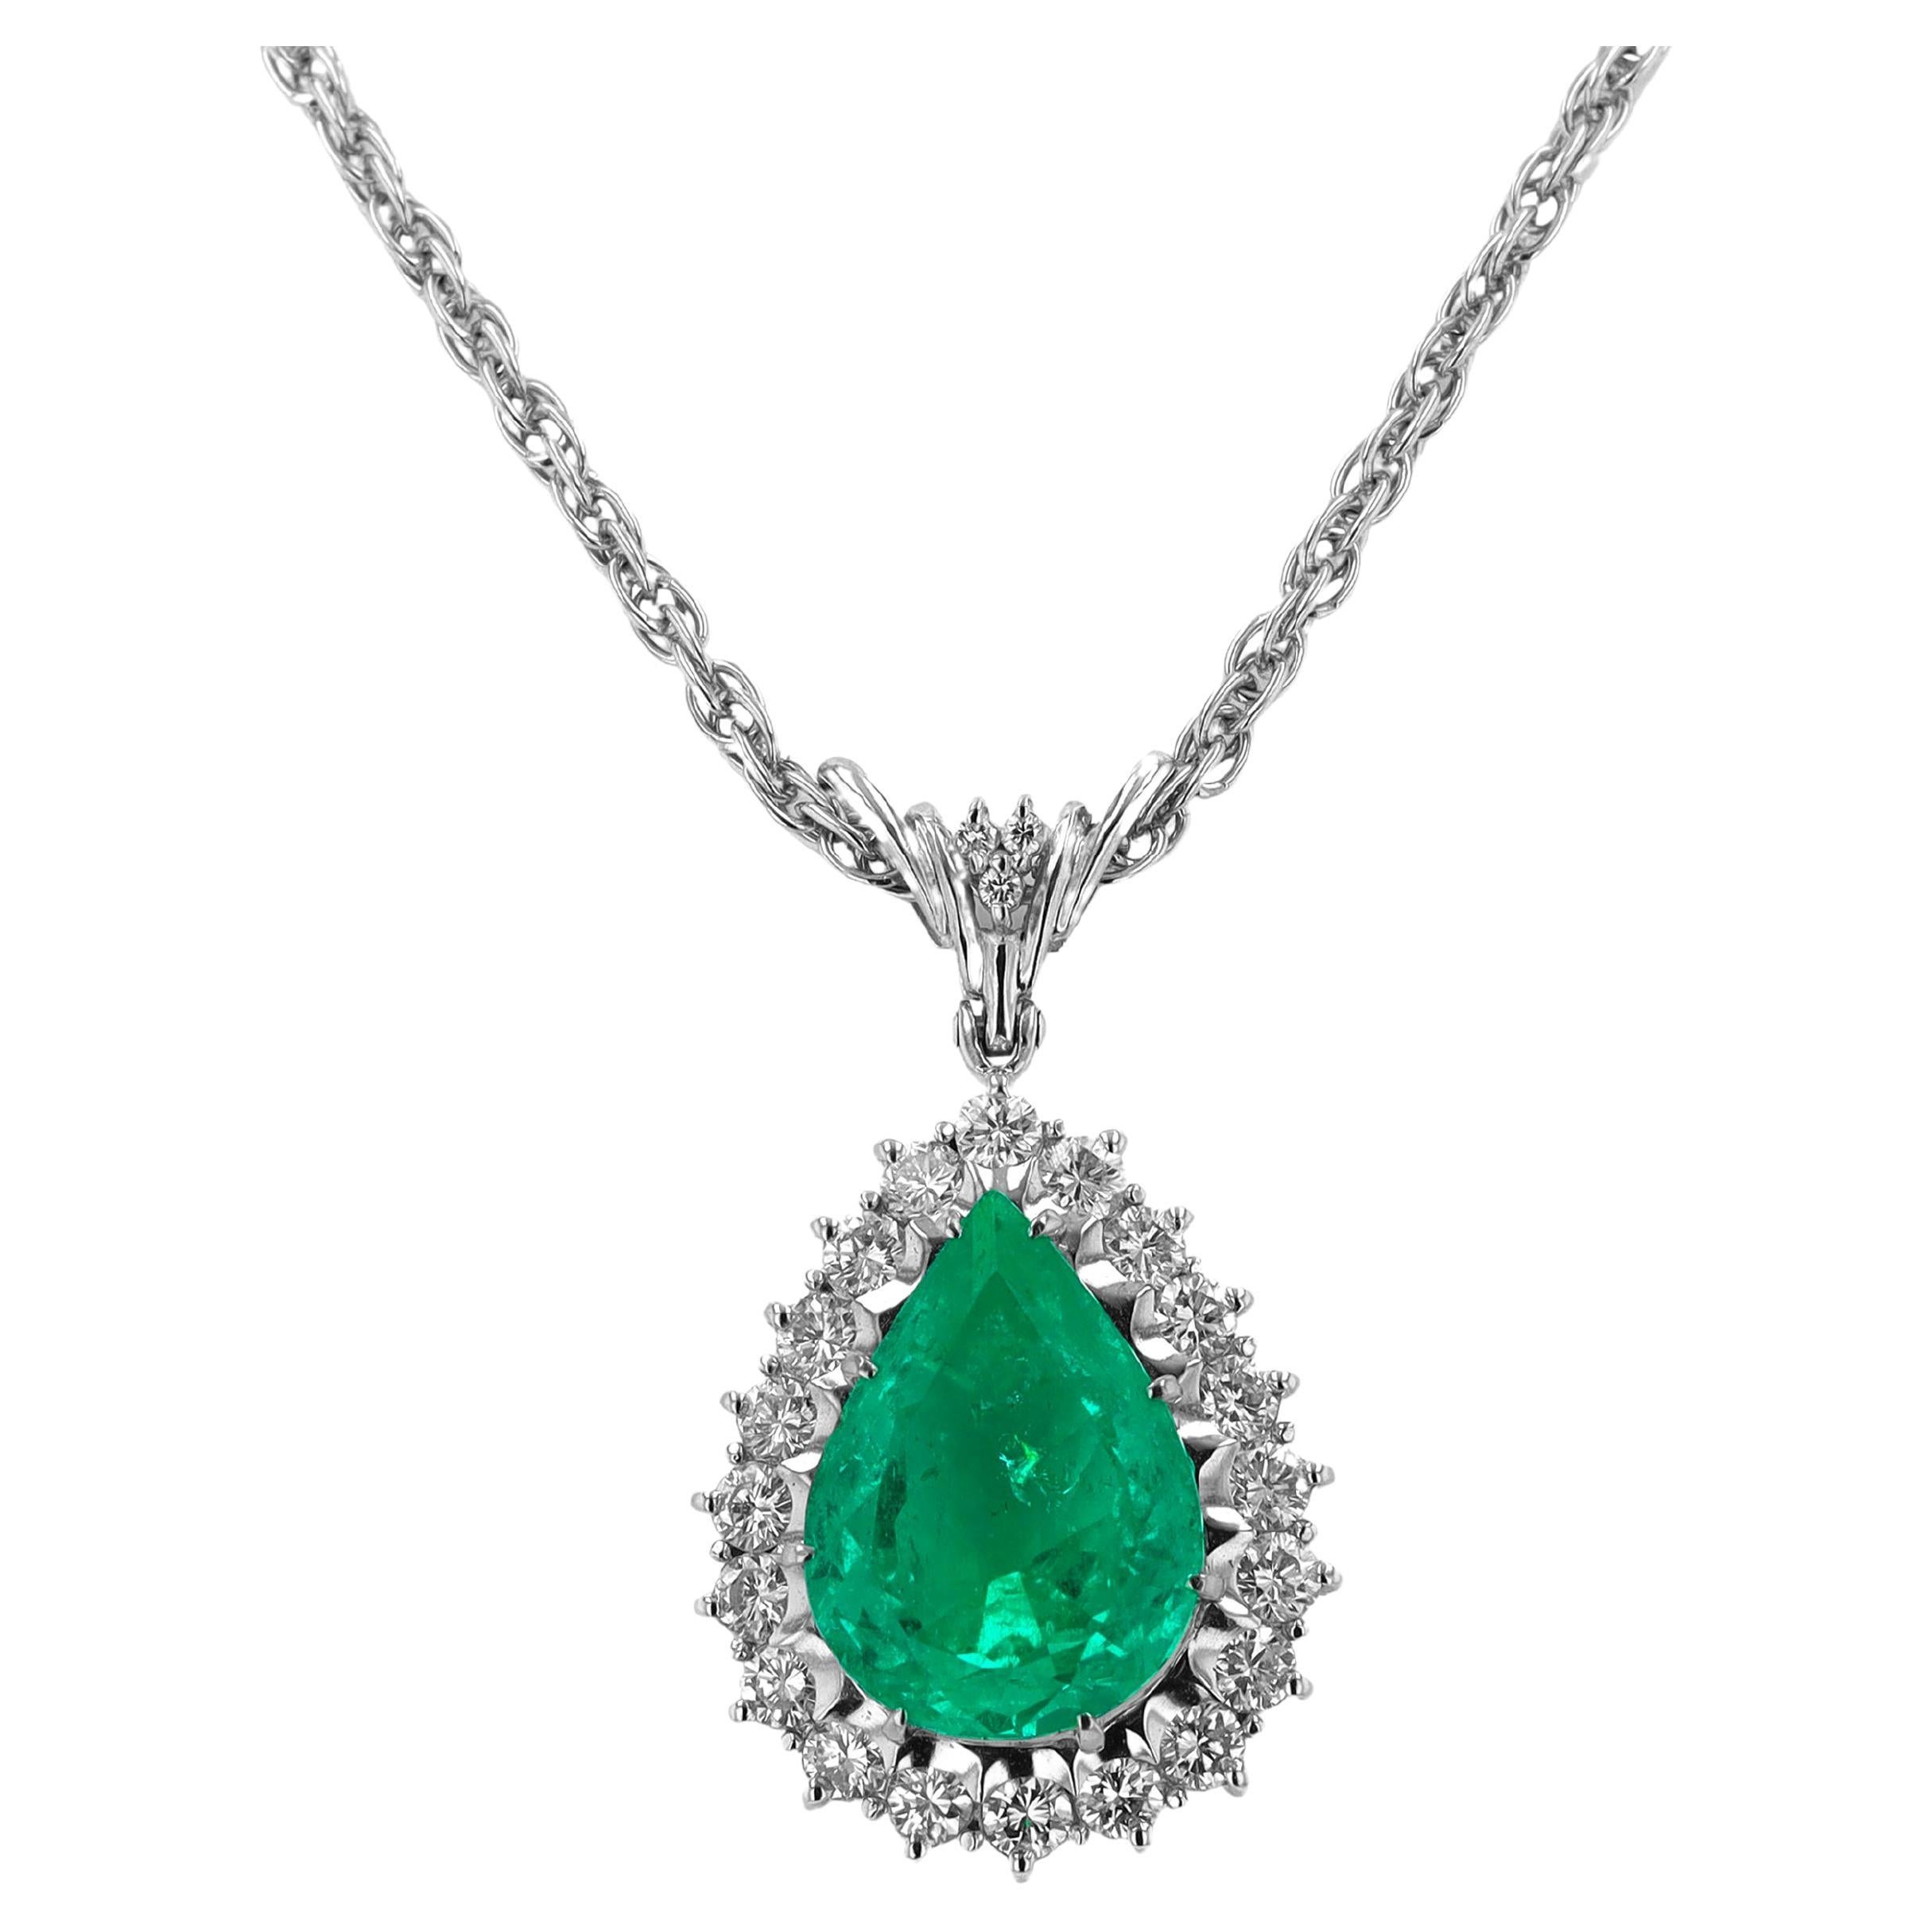 GIA Certified 10 Carat Colombian Emerald Necklace For Sale